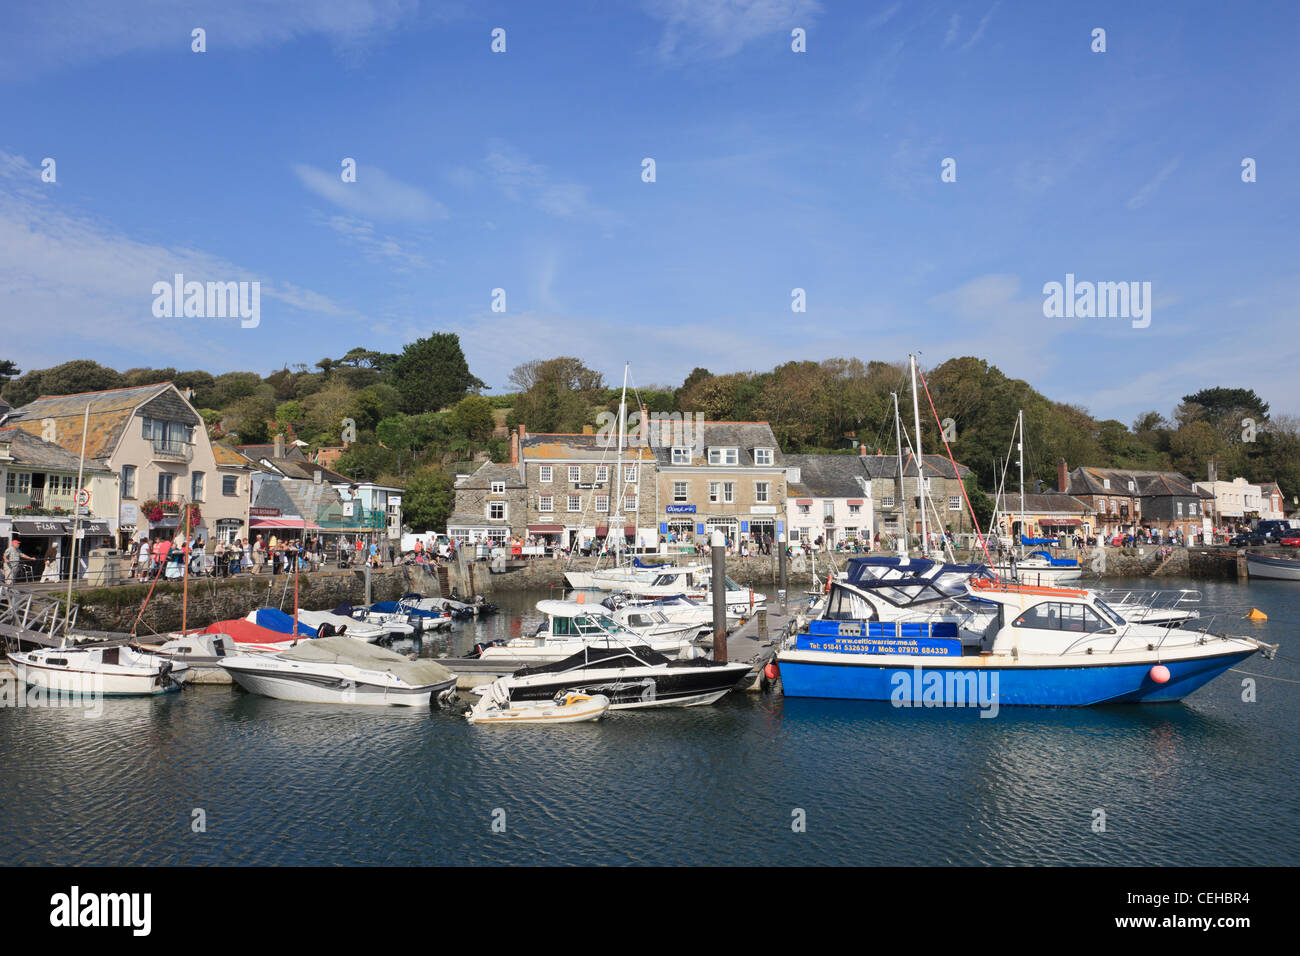 Padstow Cornwall England UK. Village harbour scene with boats moored on Cornish coast in late summer Stock Photo